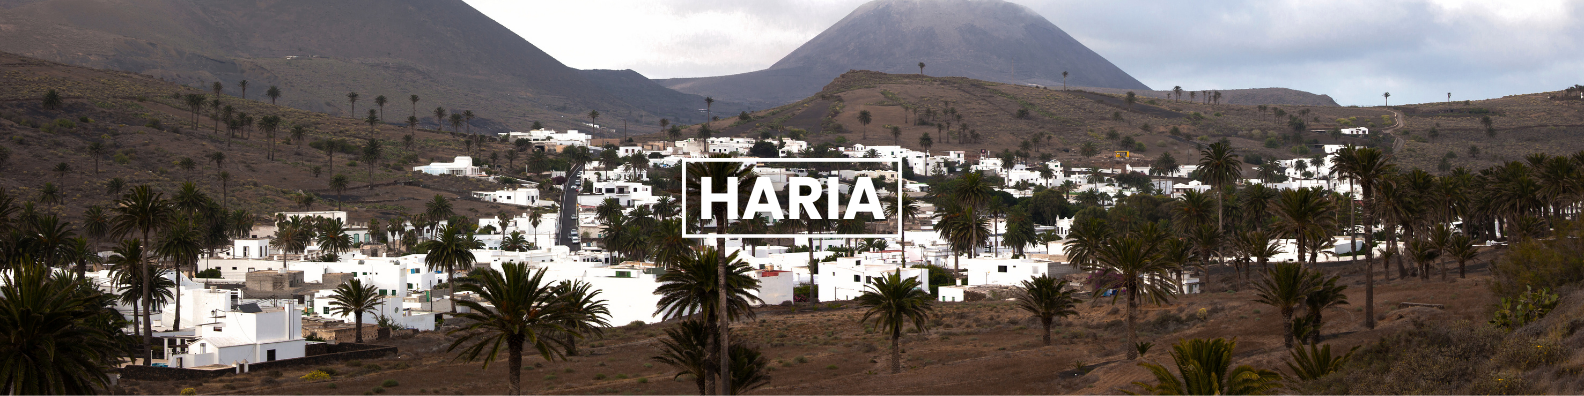 a blurred image of a landscape with the word haria on it